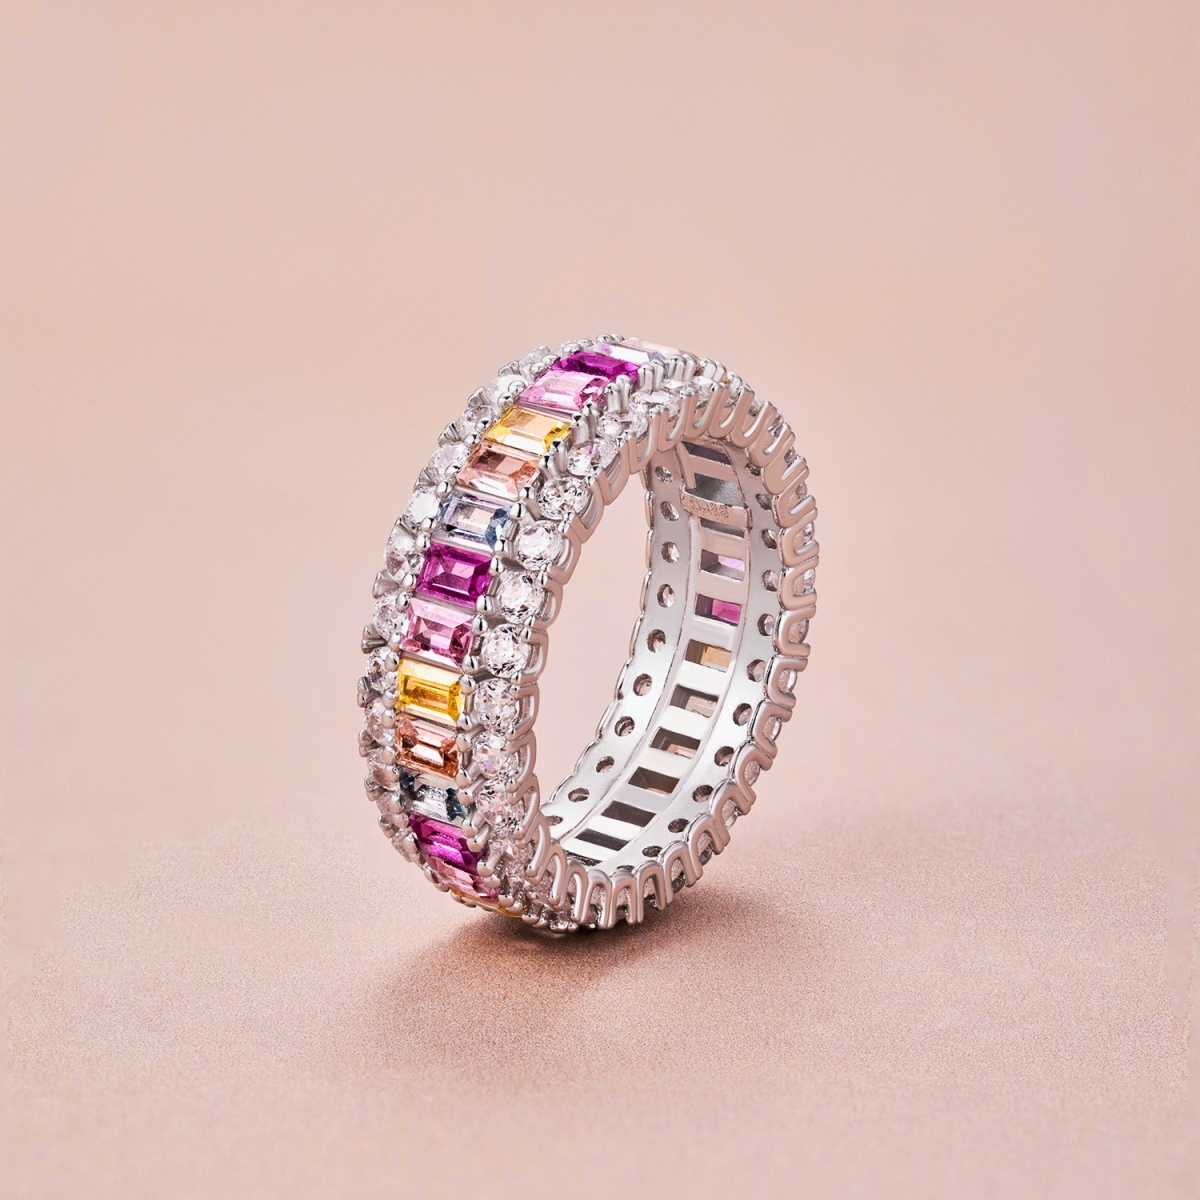 Rainbow Emerald Sterling Silver Pave Ring